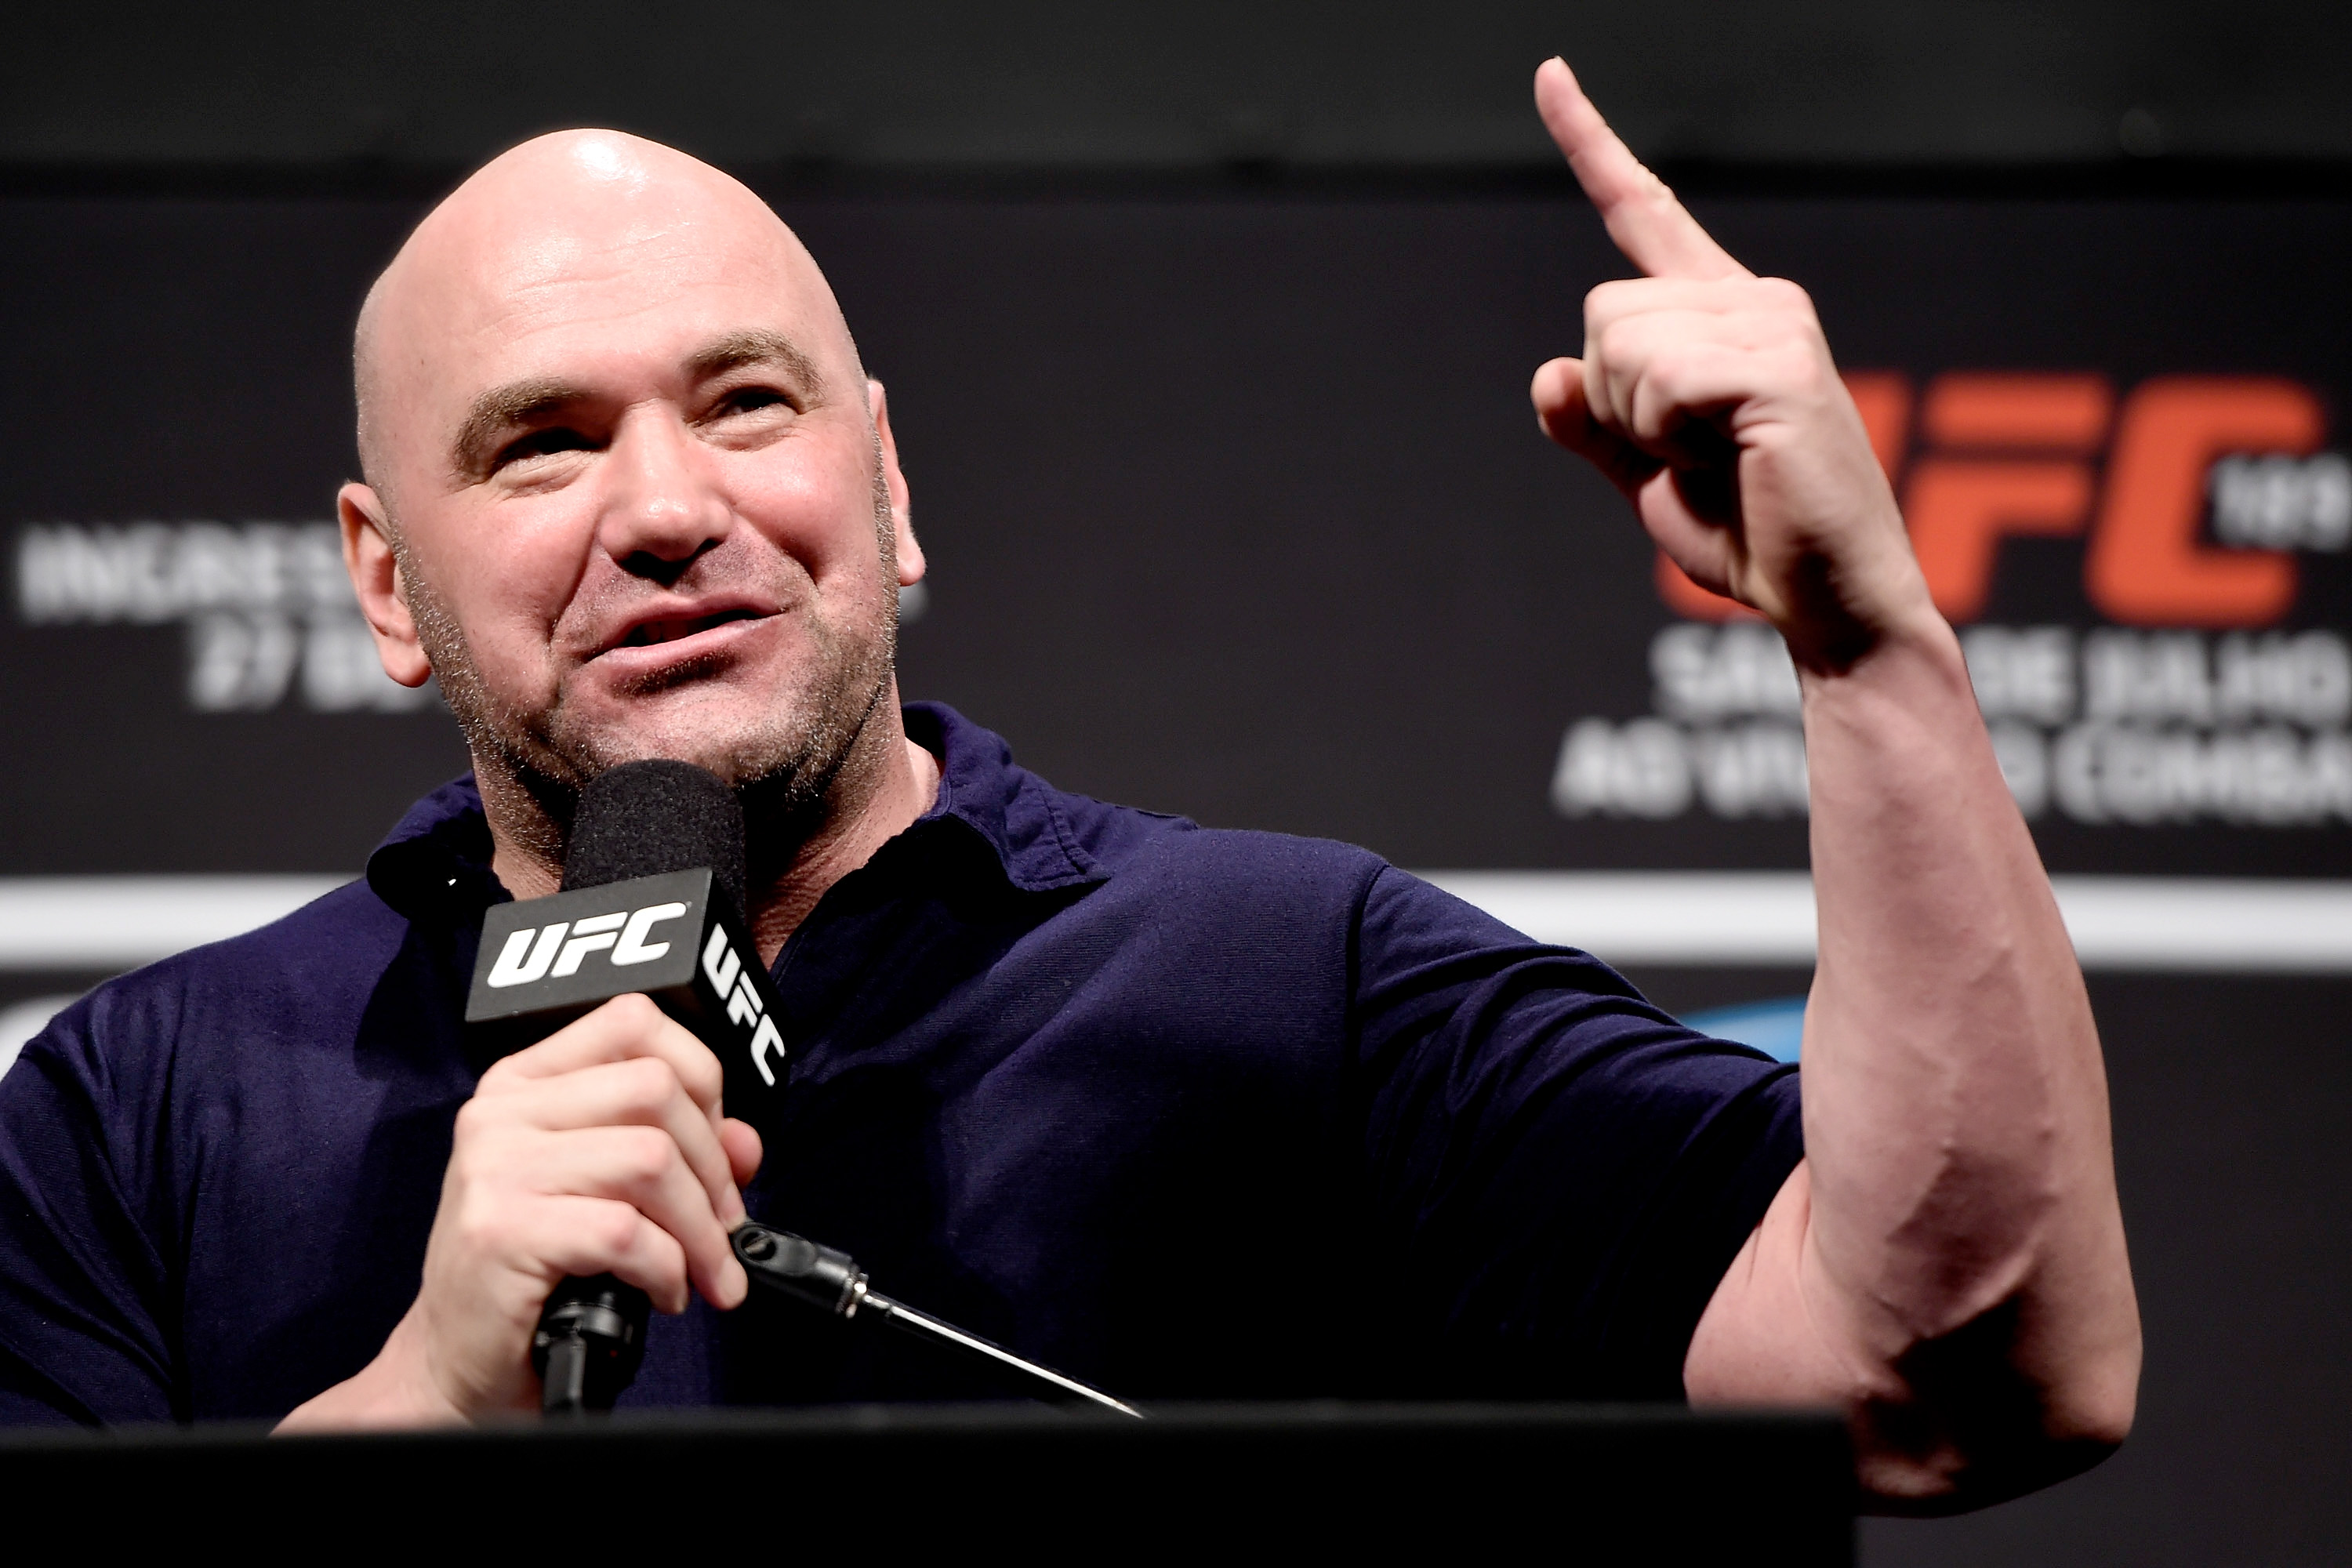 Dana White Continues Explosive Rants by Blasting Vegas Newspaper Critical of UFC 261